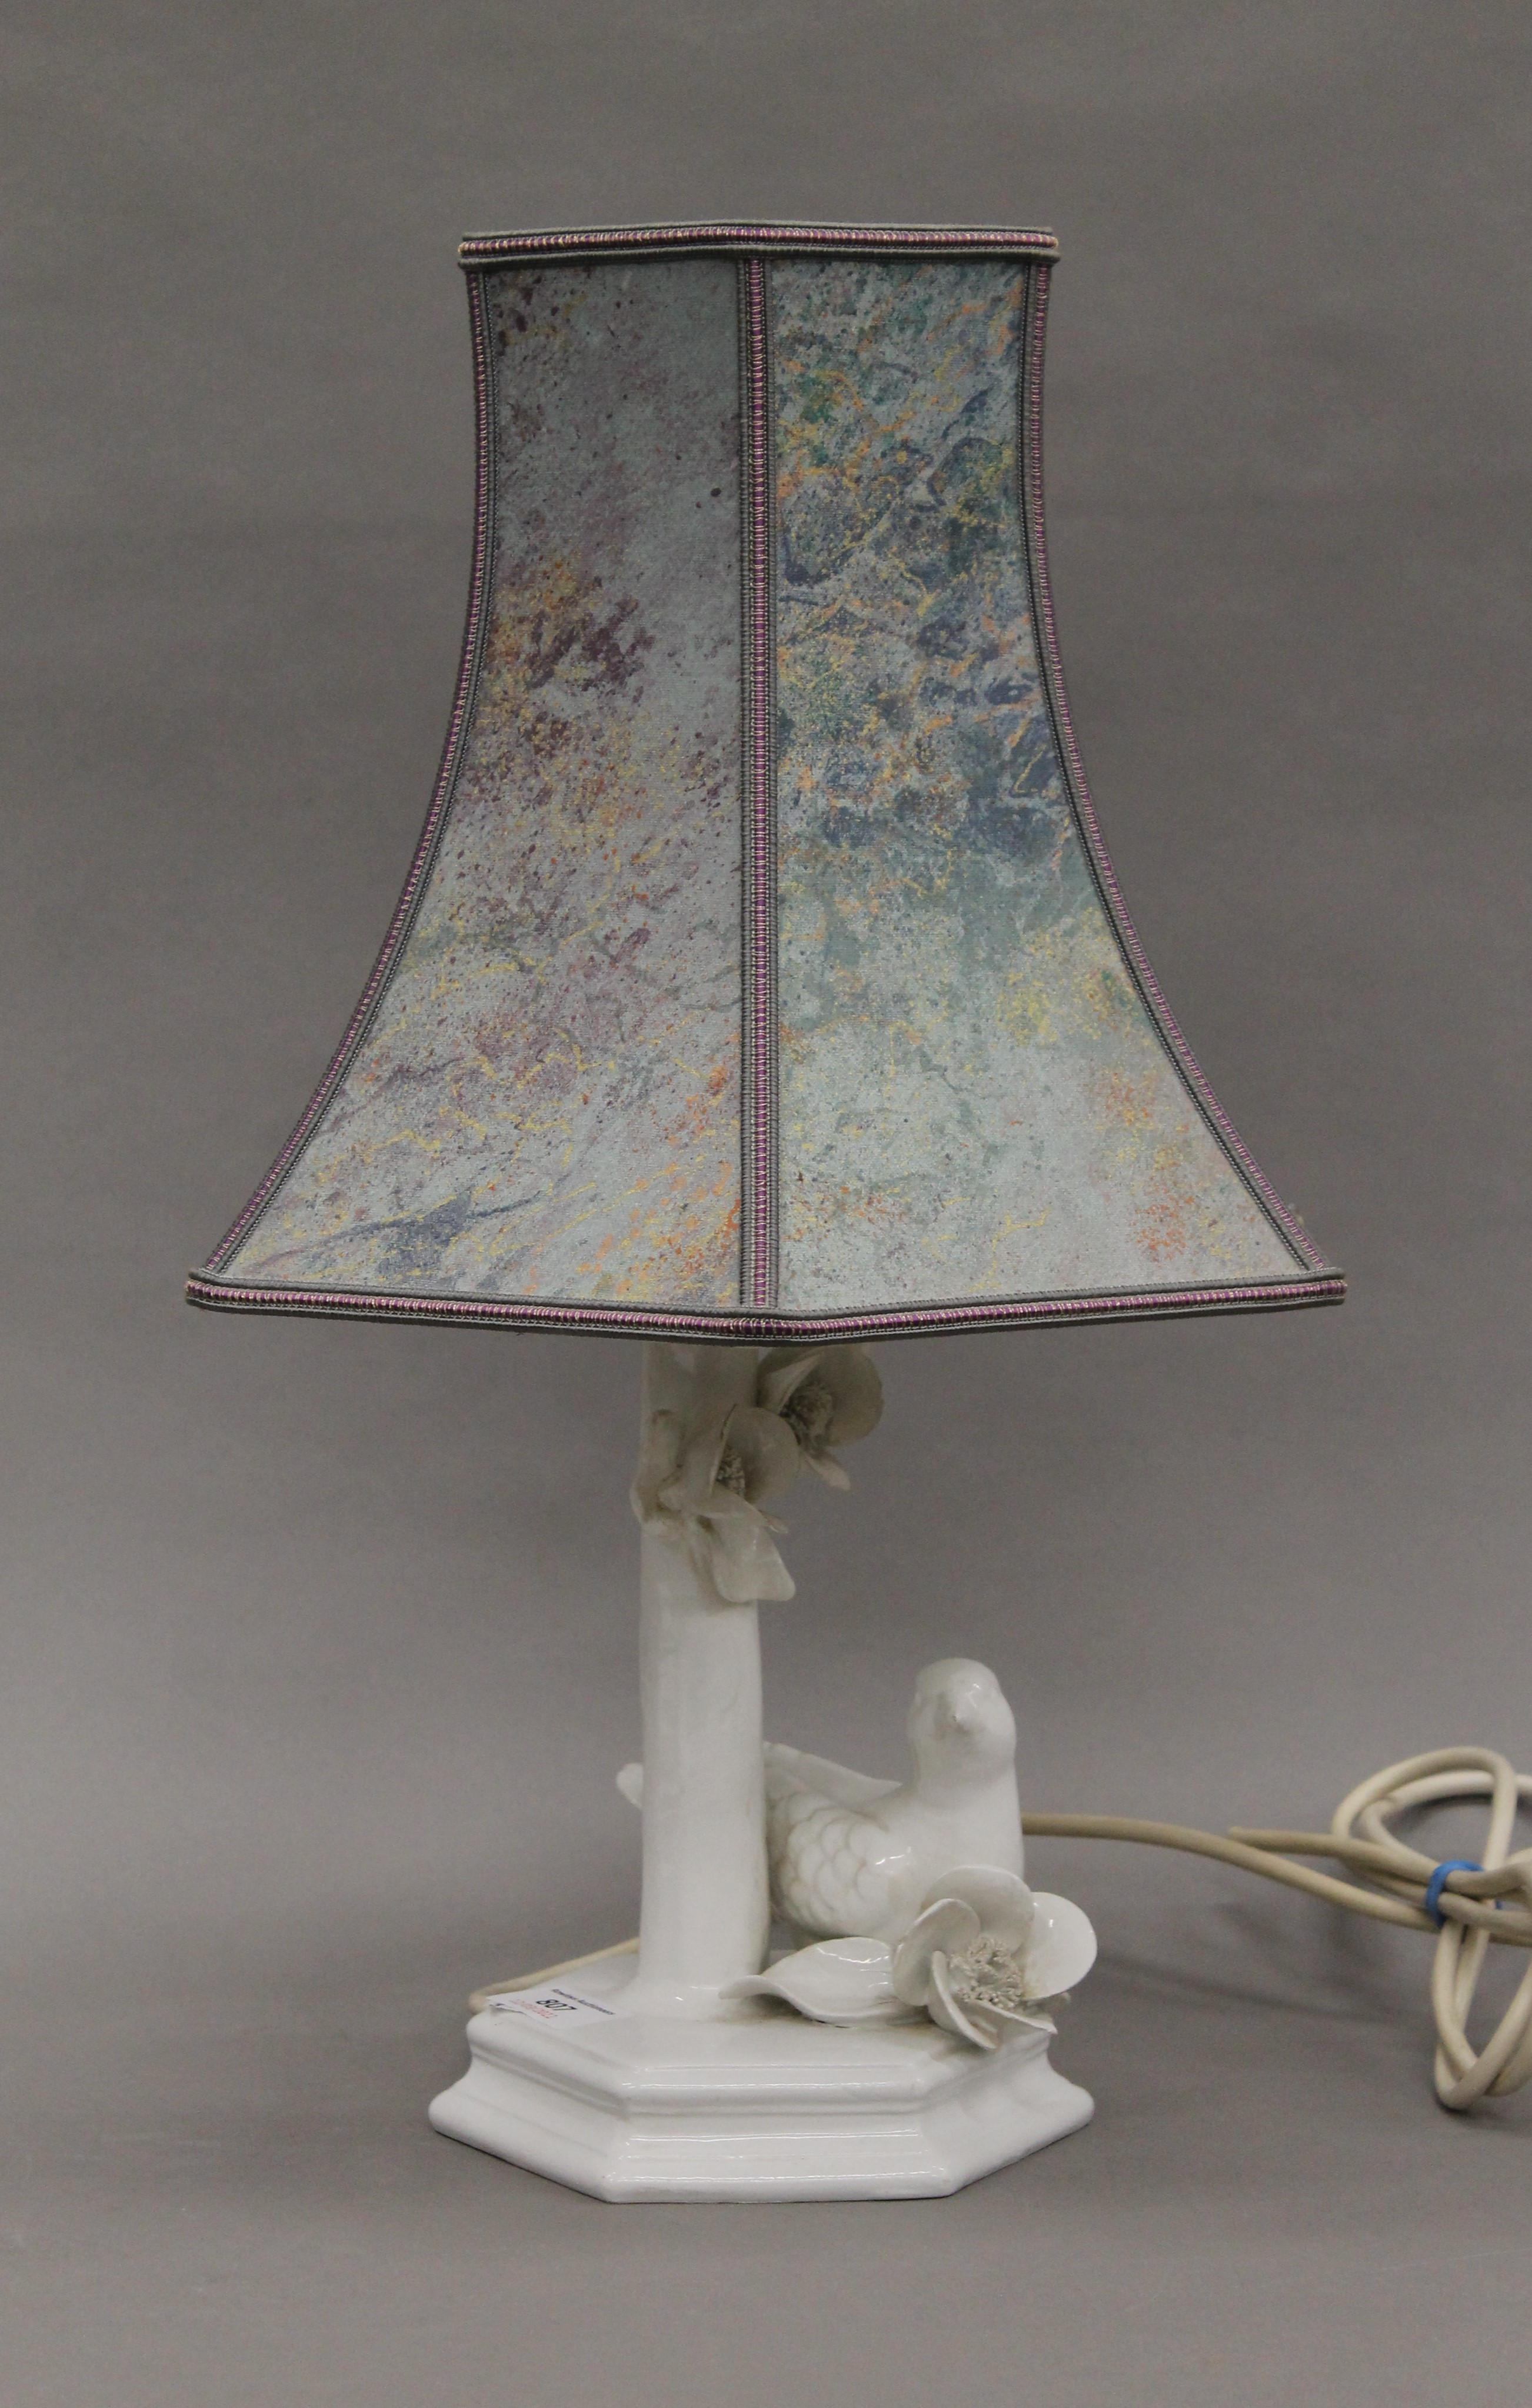 A porcelain table lamp. 44 cm high overall.